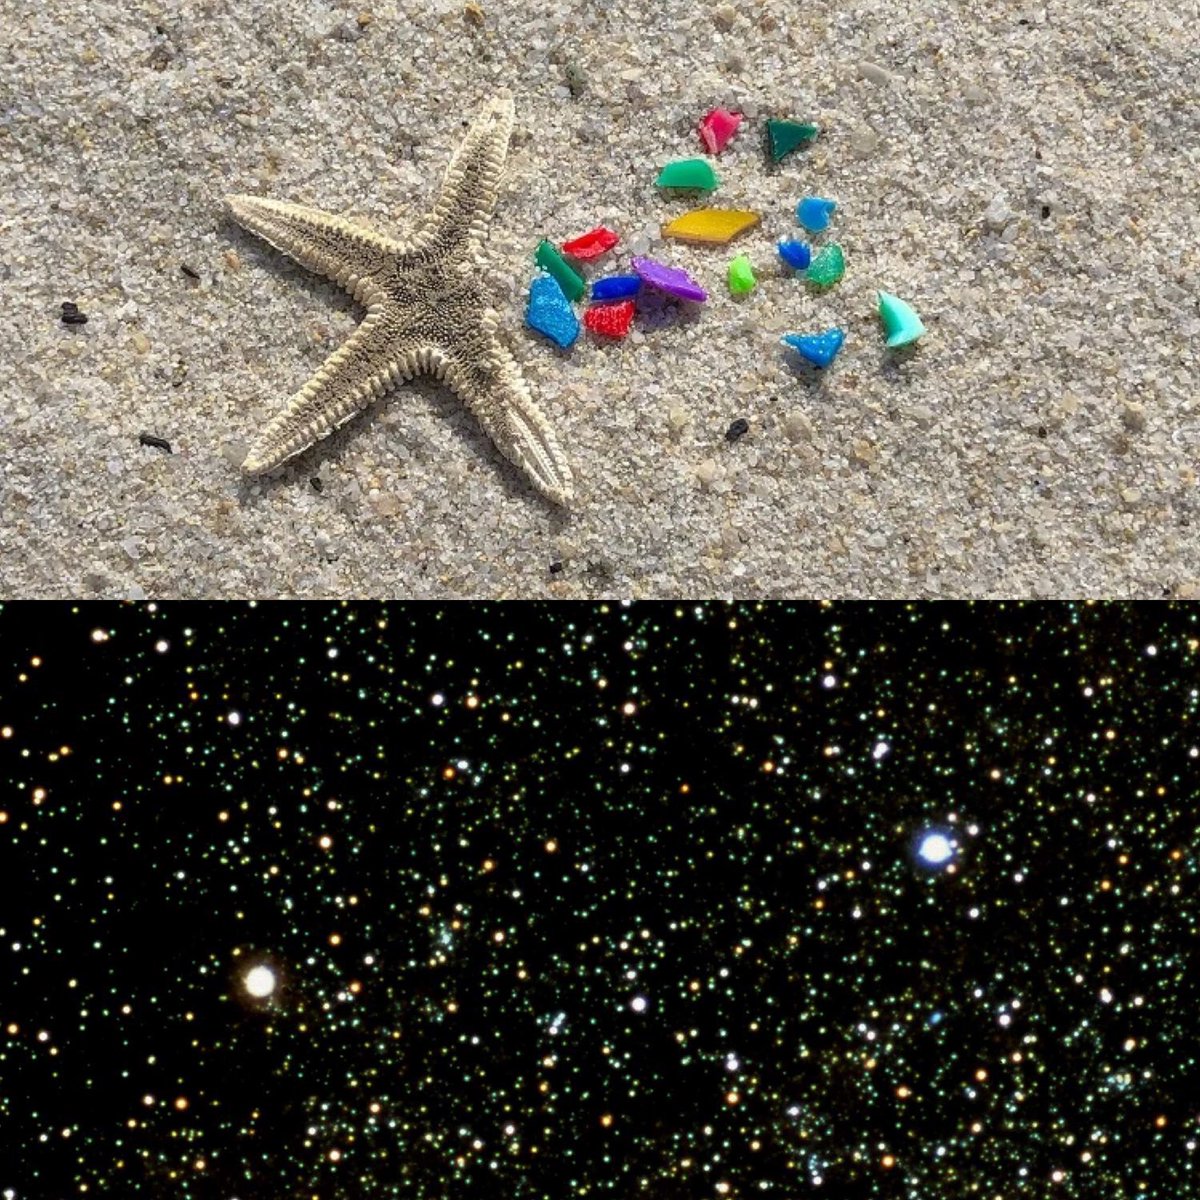 Microplastics. I just found out that these tiny plastic pieces in our oceans and environment now outnumber the stars in the Milky Way galaxy by at least 500 times #microplastics #plasticfree #plasticfreeoceans #2minutebeachclean #surfersagainstsewage